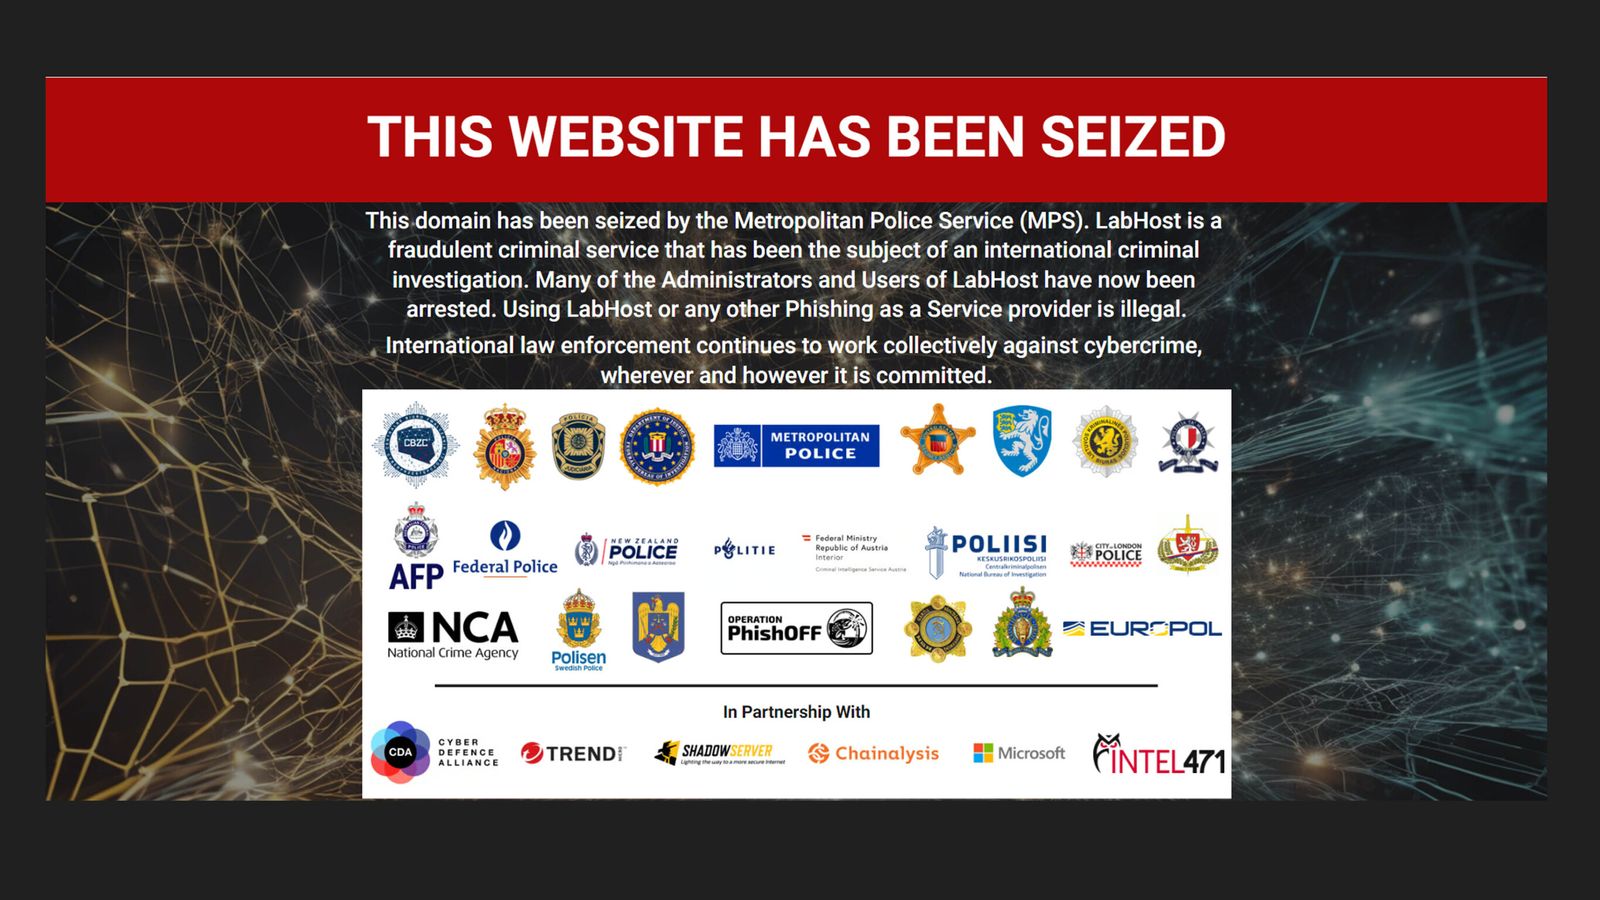 Dozens arrested and thousands contacted after scammer site taken offline